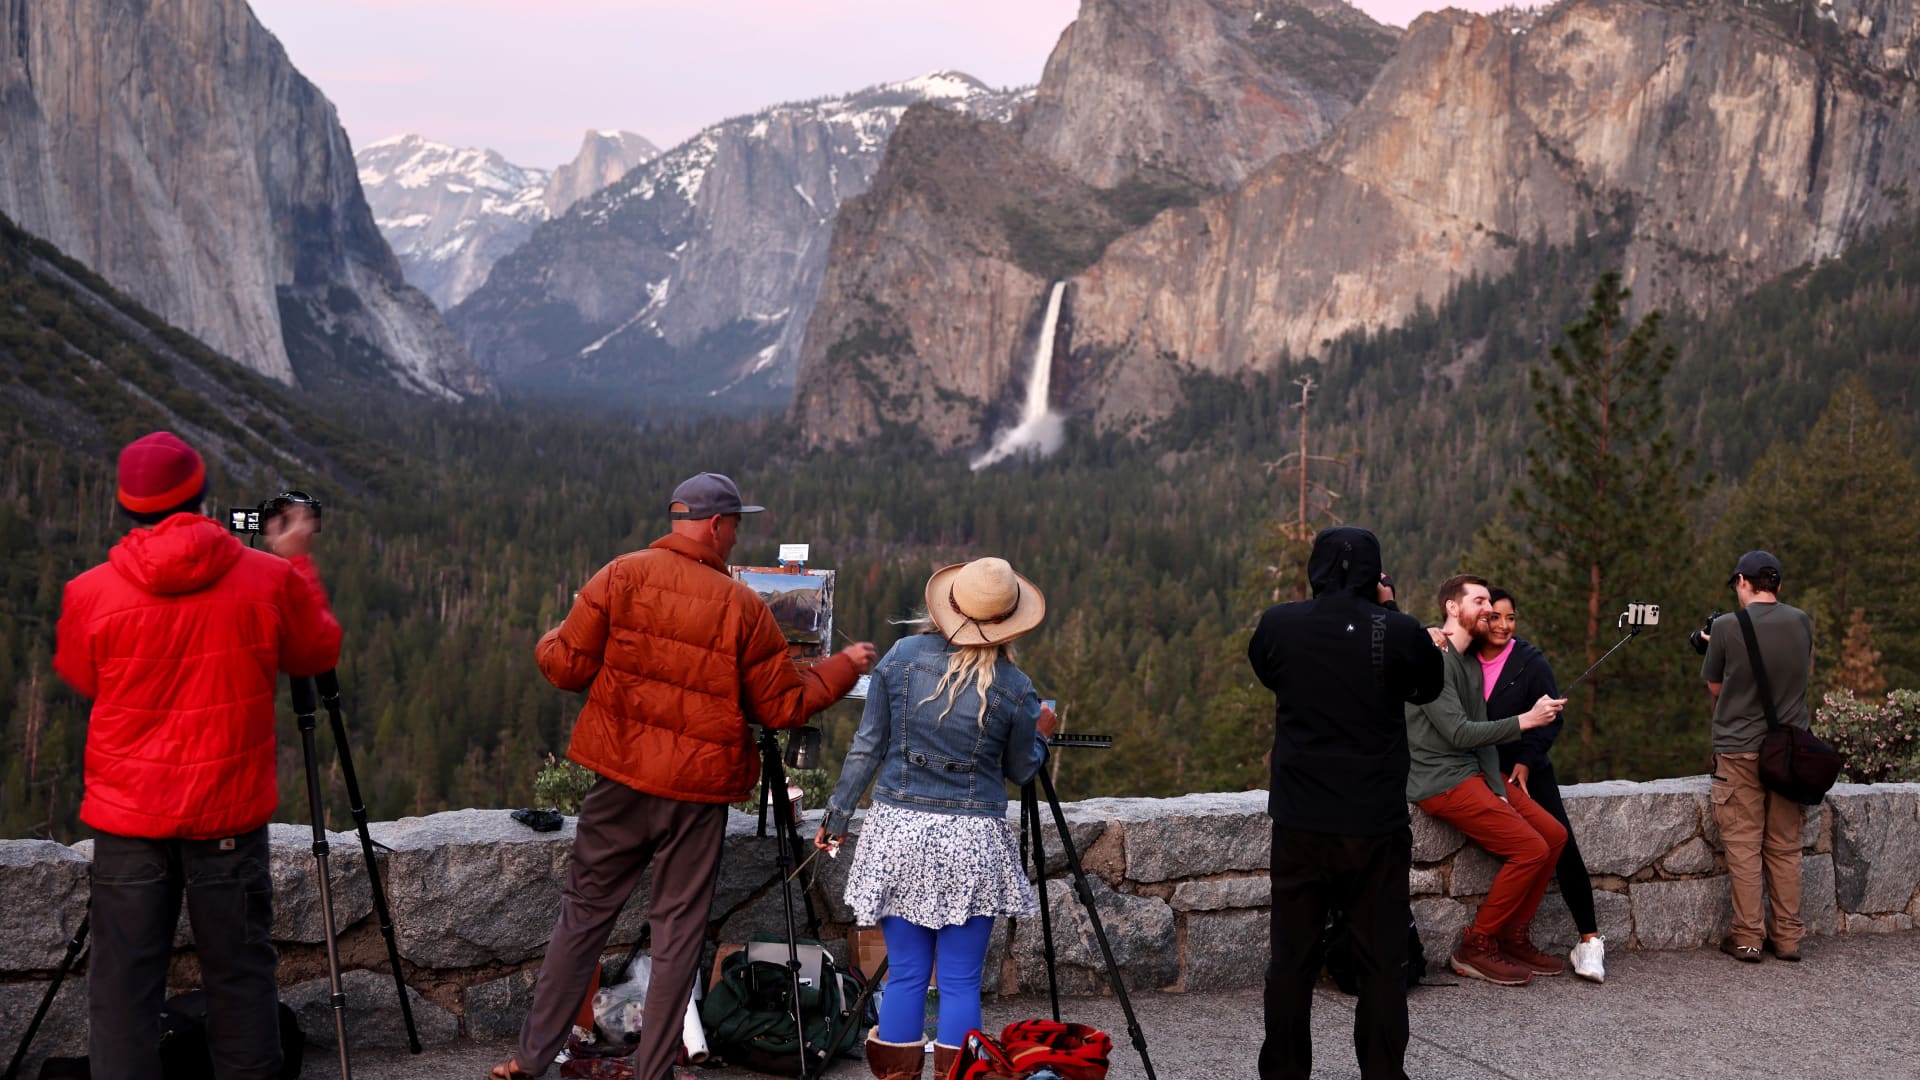 People paint and take photos as water flows forcefully down Bridalveil Fall in Yosemite Valley, as warming temperatures have increased snowpack runoff, on April 27, 2023 in Yosemite National Park, California. 